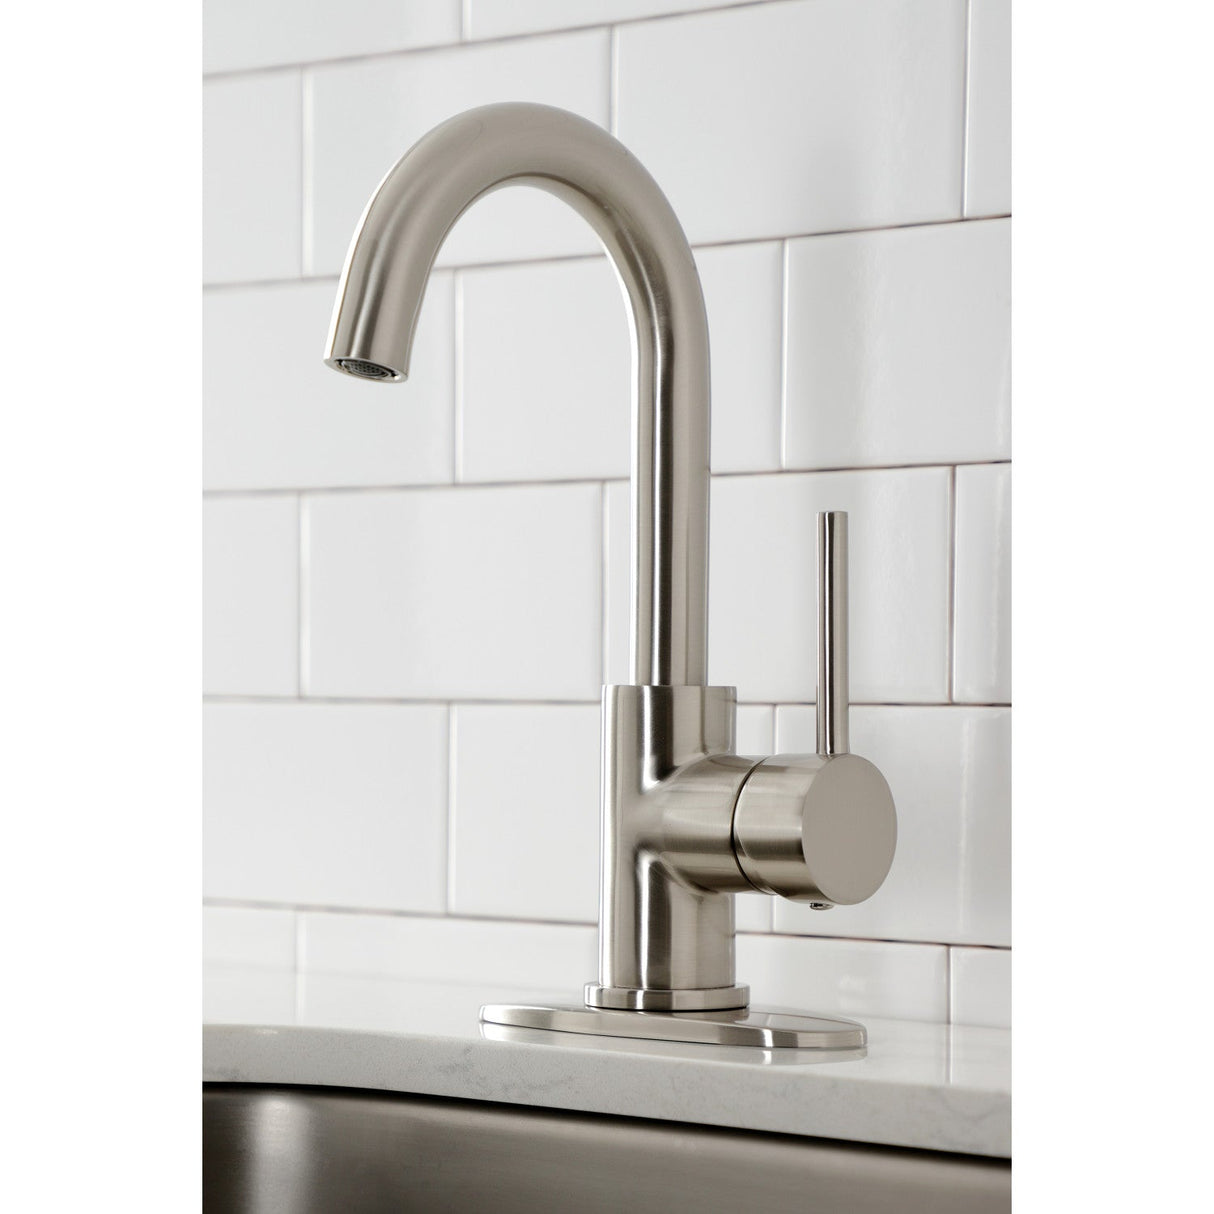 Concord LS8538DL Single-Handle 1-Hole Deck Mount Bar Faucet, Brushed Nickel